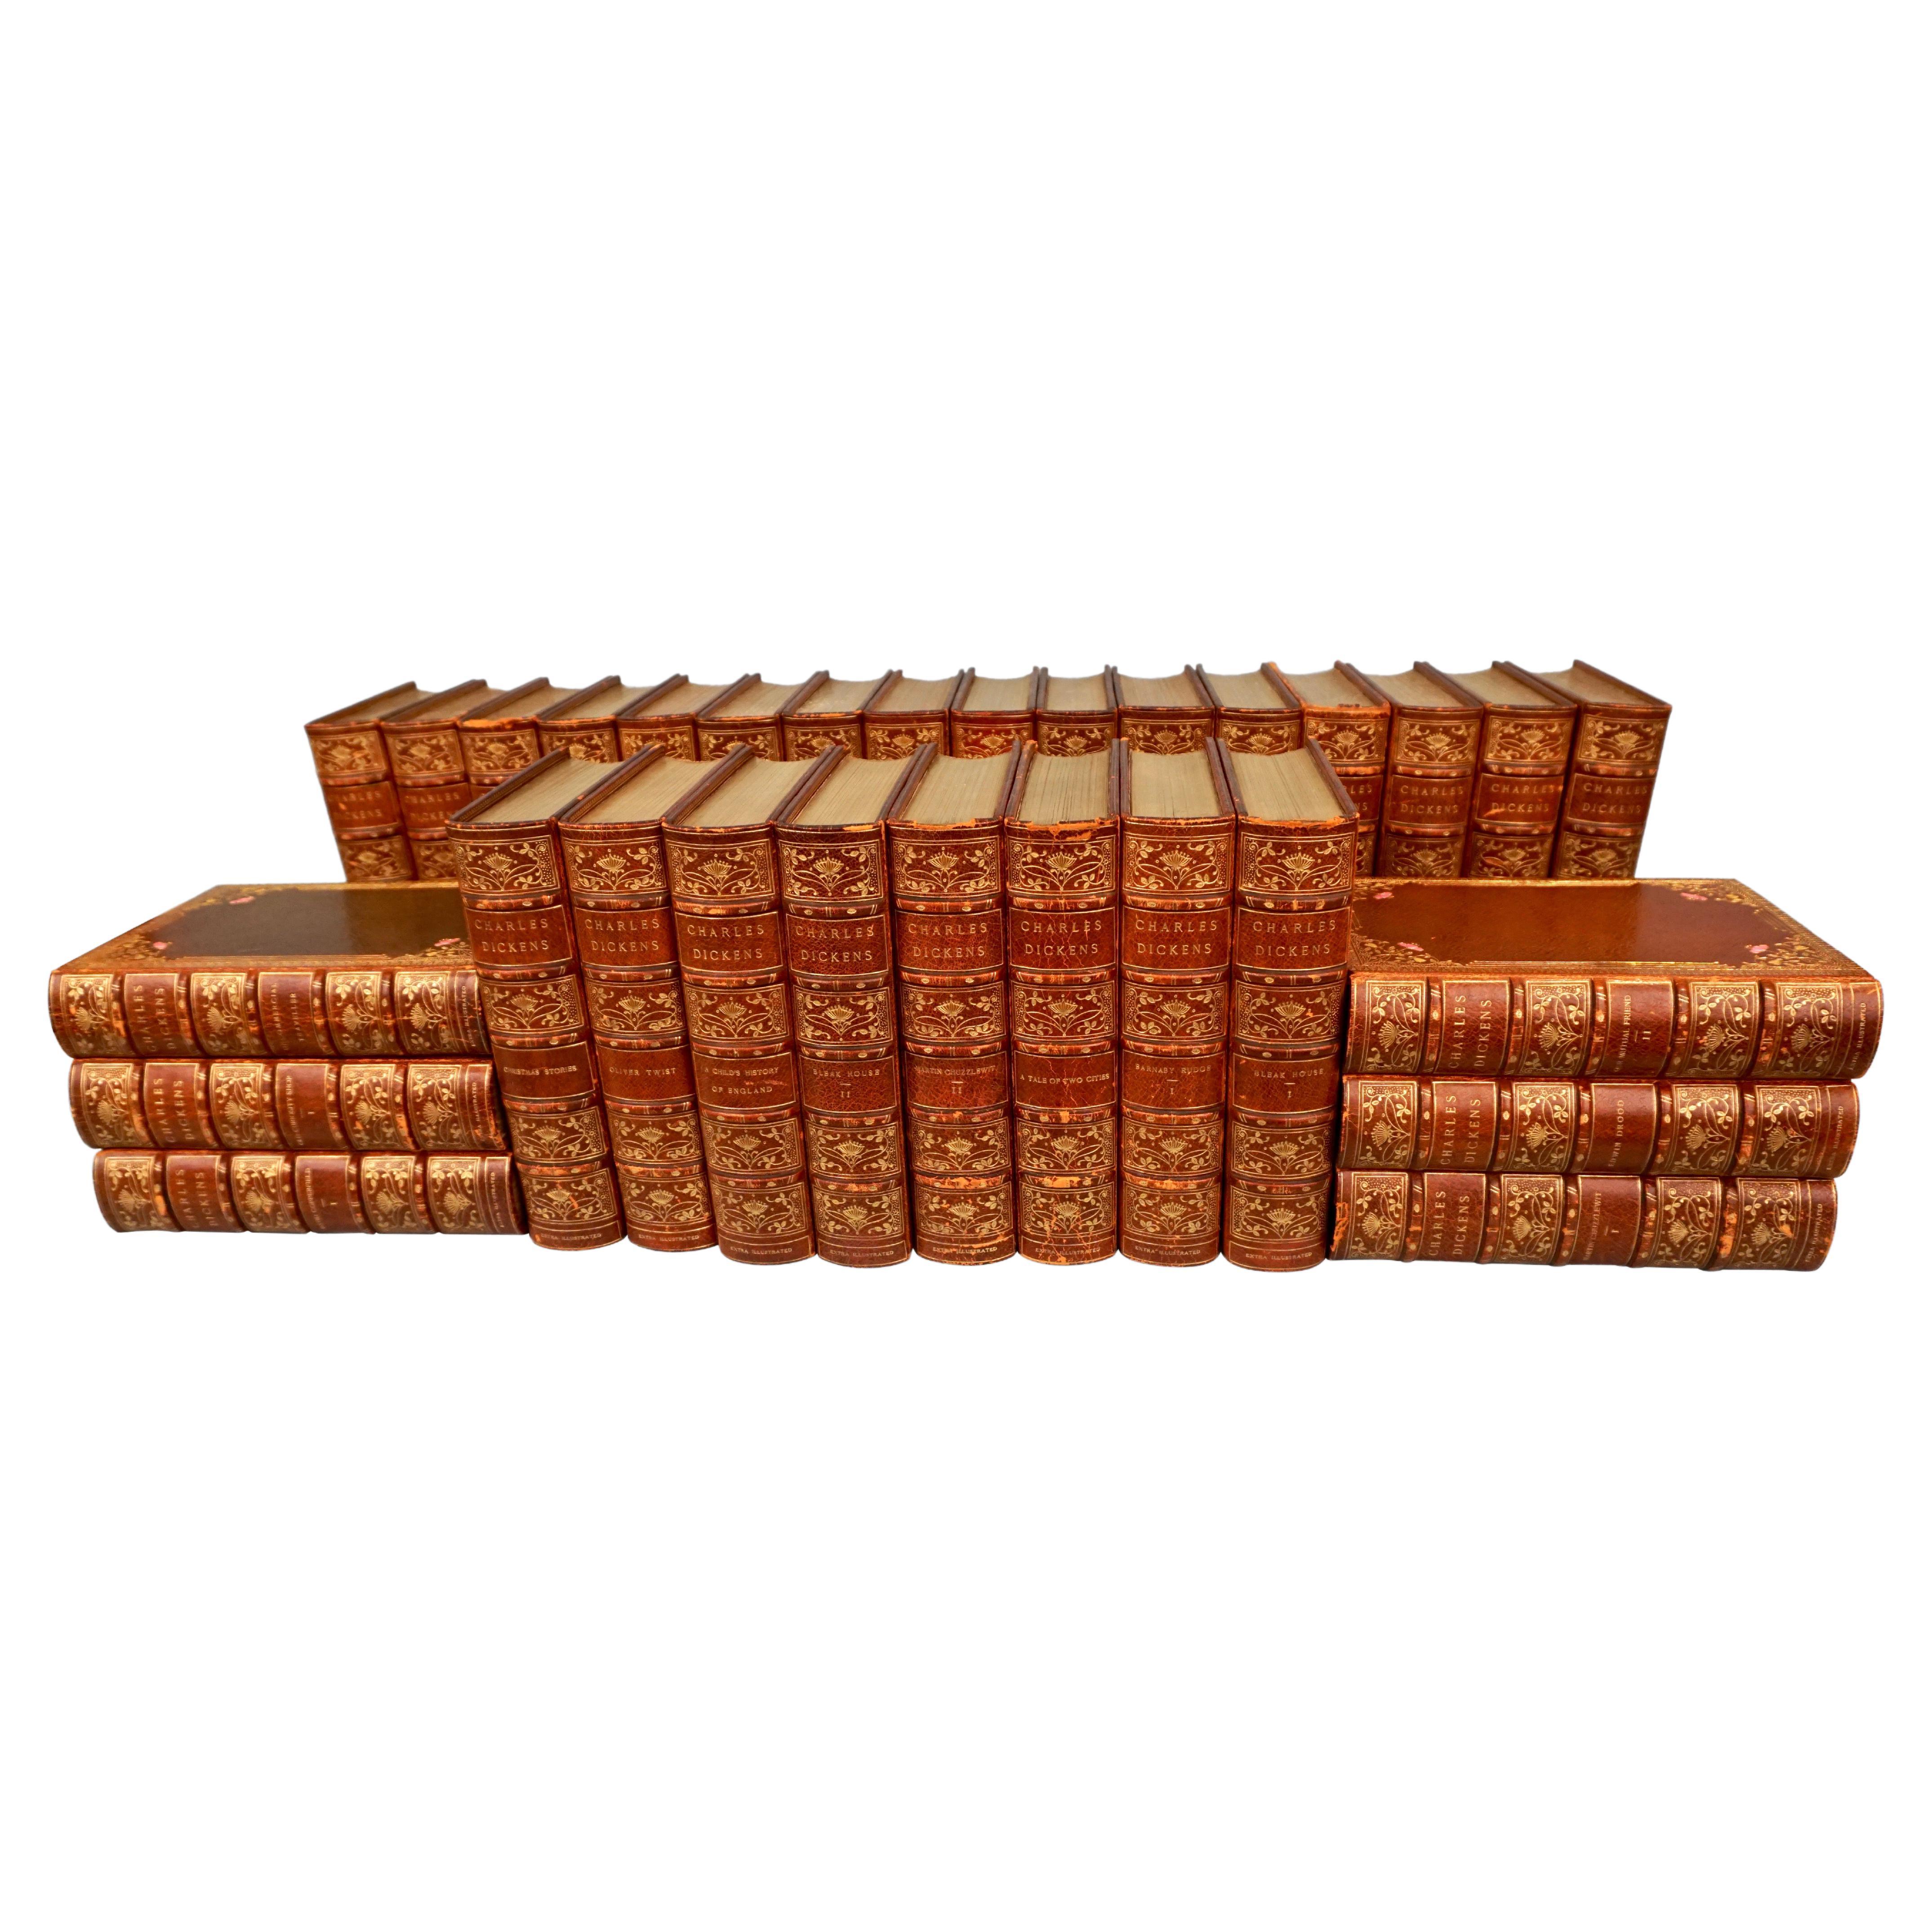 Complete Works of Dickens Autograph Edition in 30 Gilt-Tooled Leather Volumes